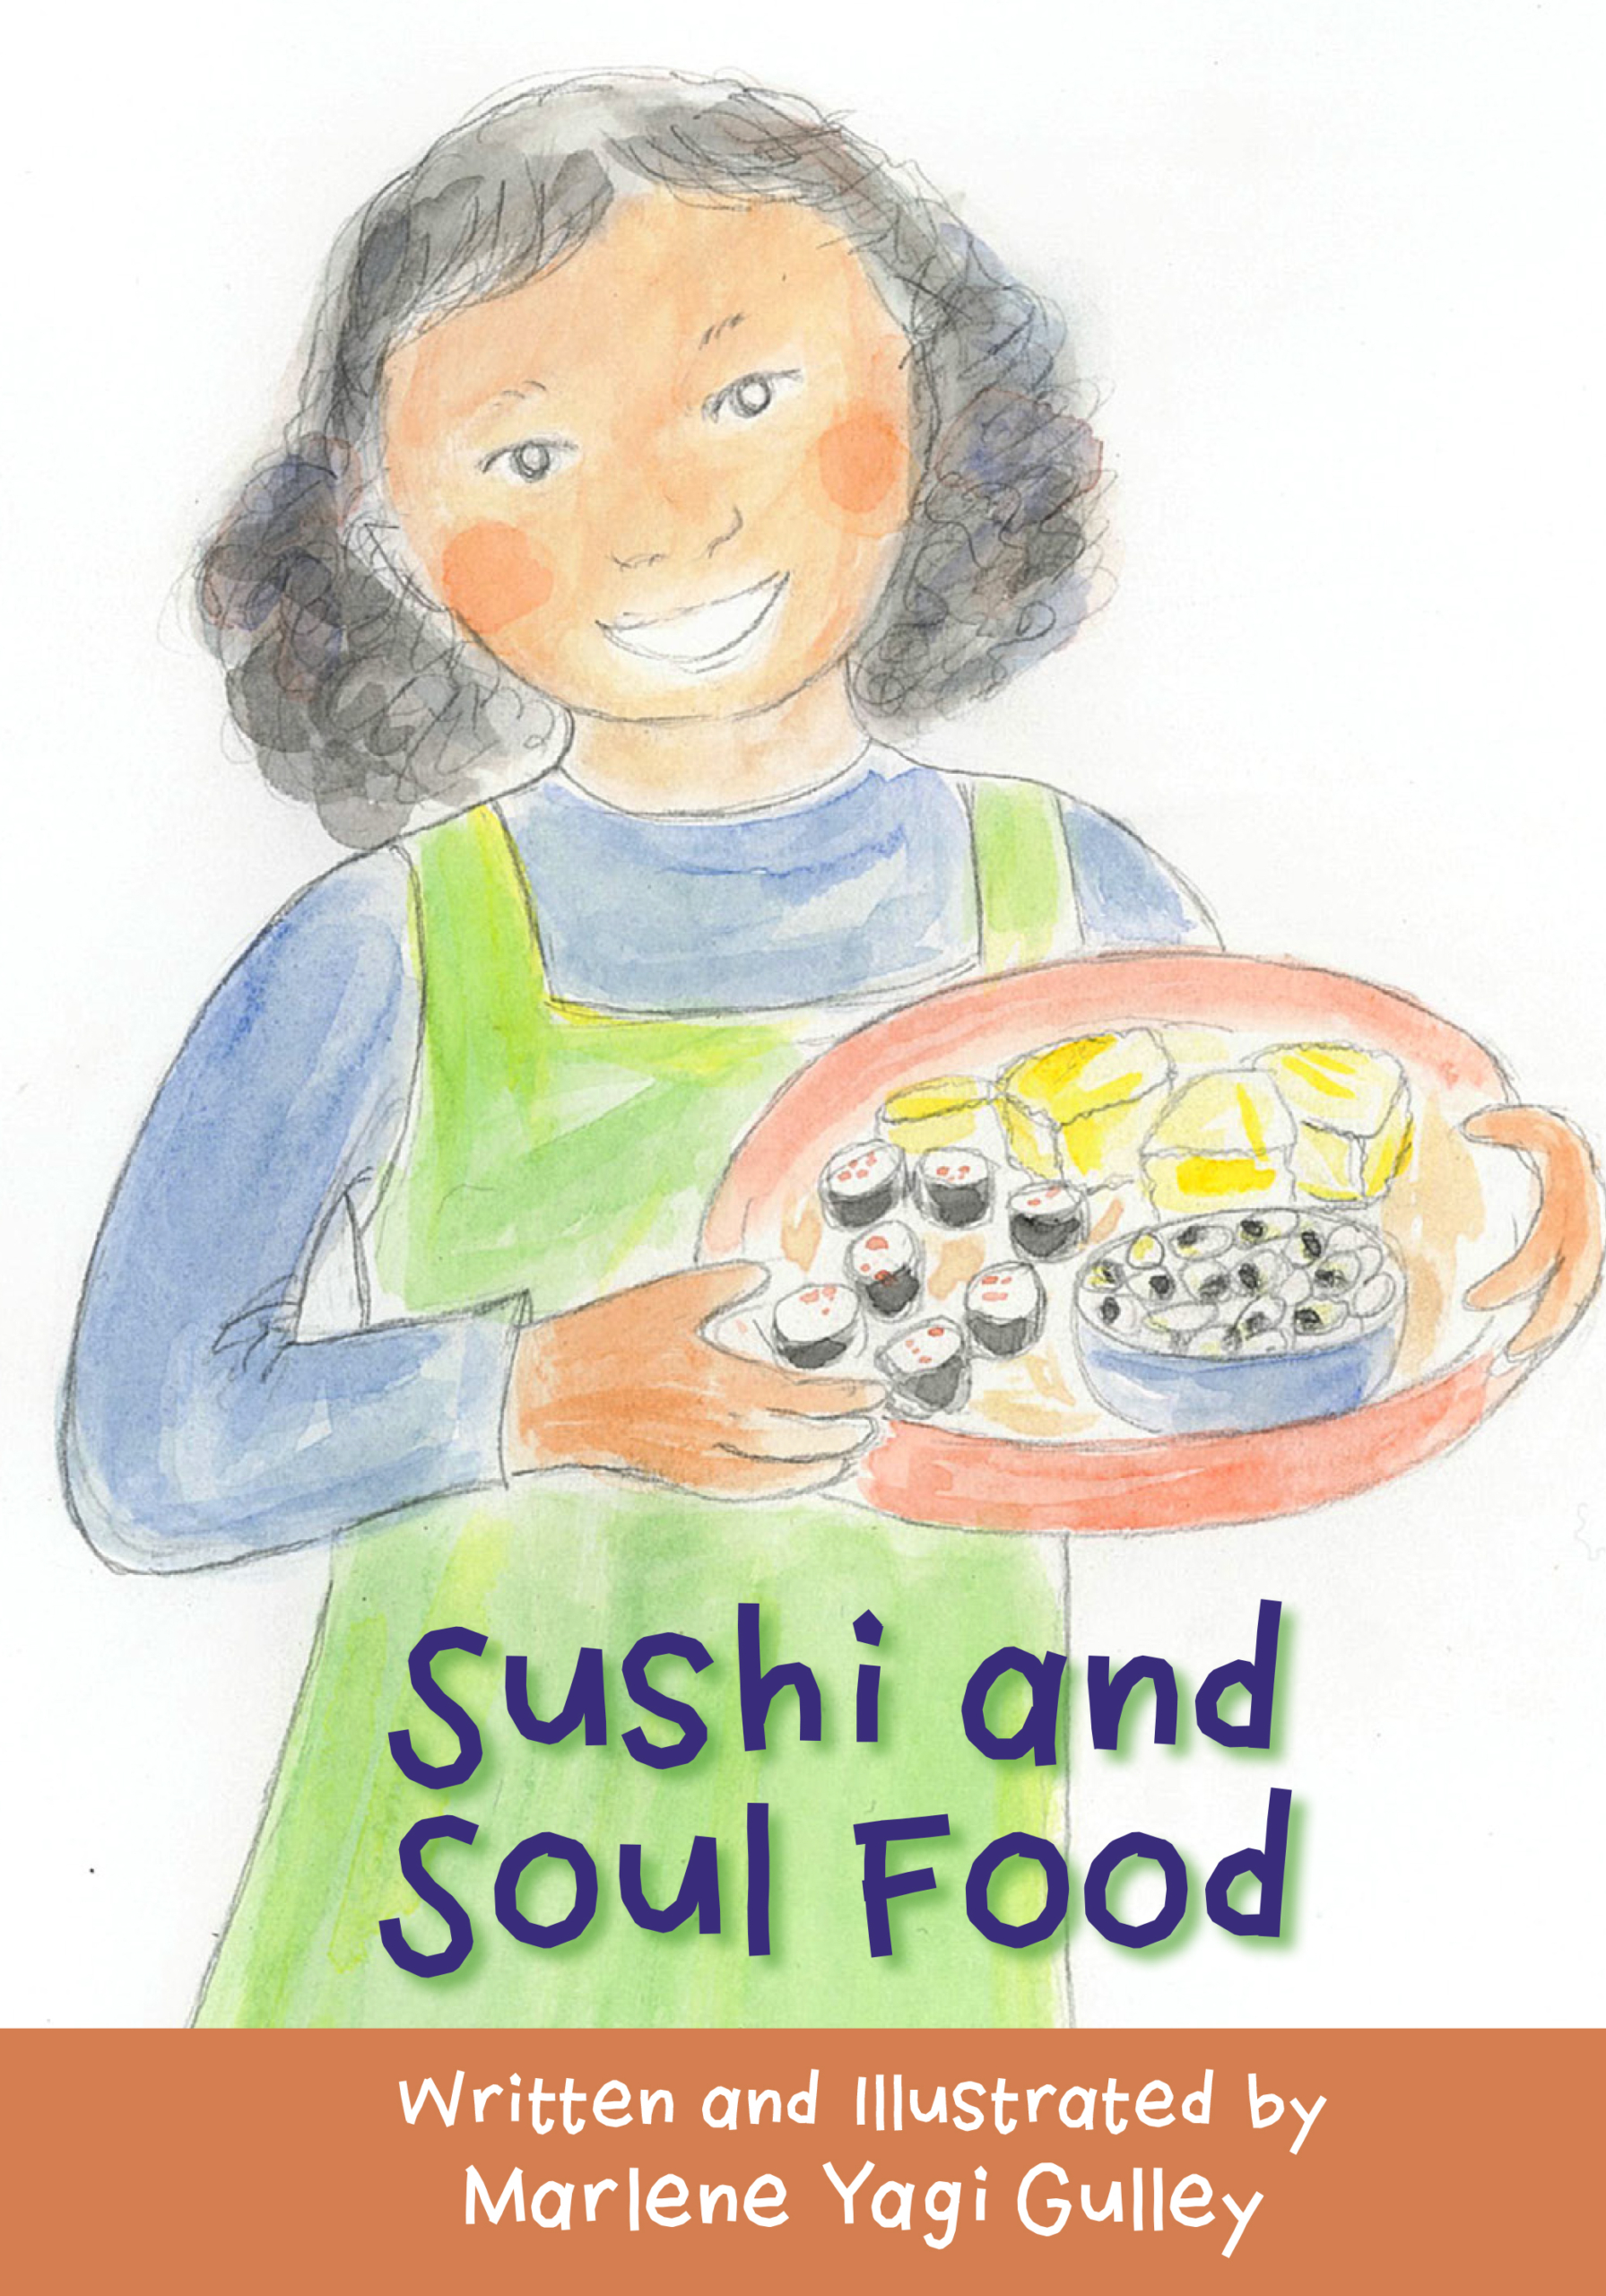 Sushi and Soul Food